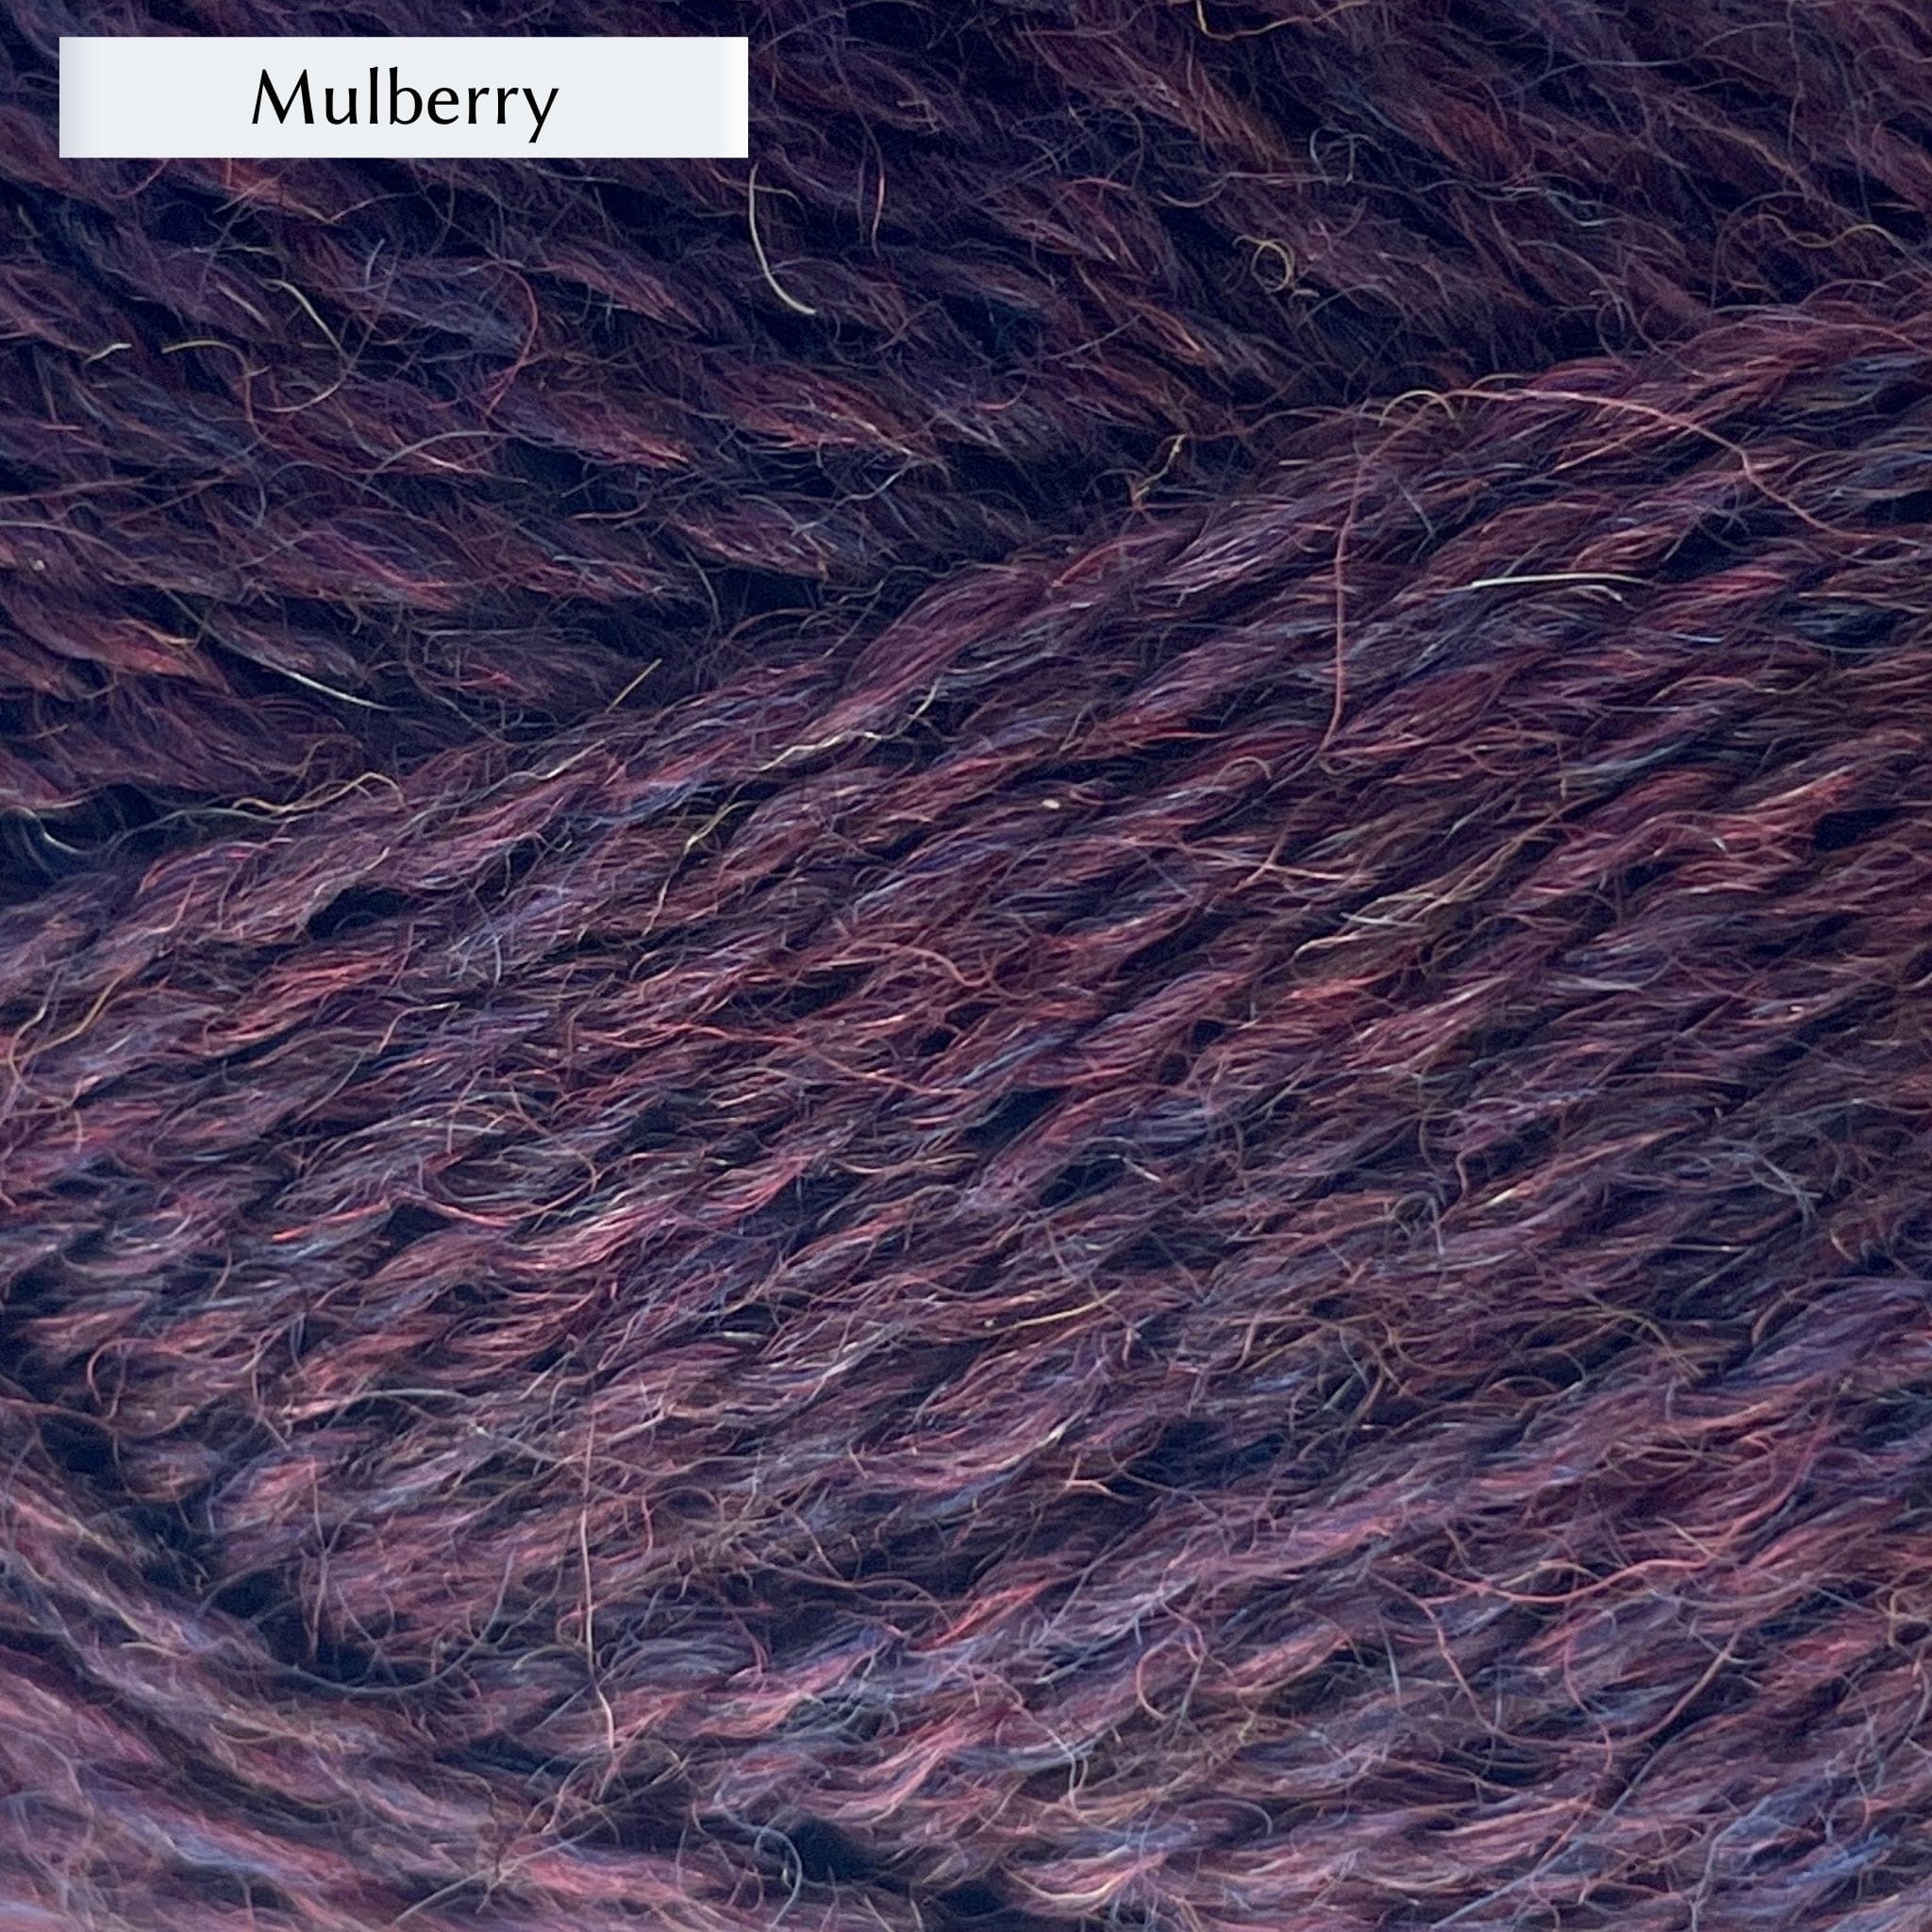 Marie Wallin's British Breeds yarn, a fingering weight, in color Mulberry, a warm royal purple